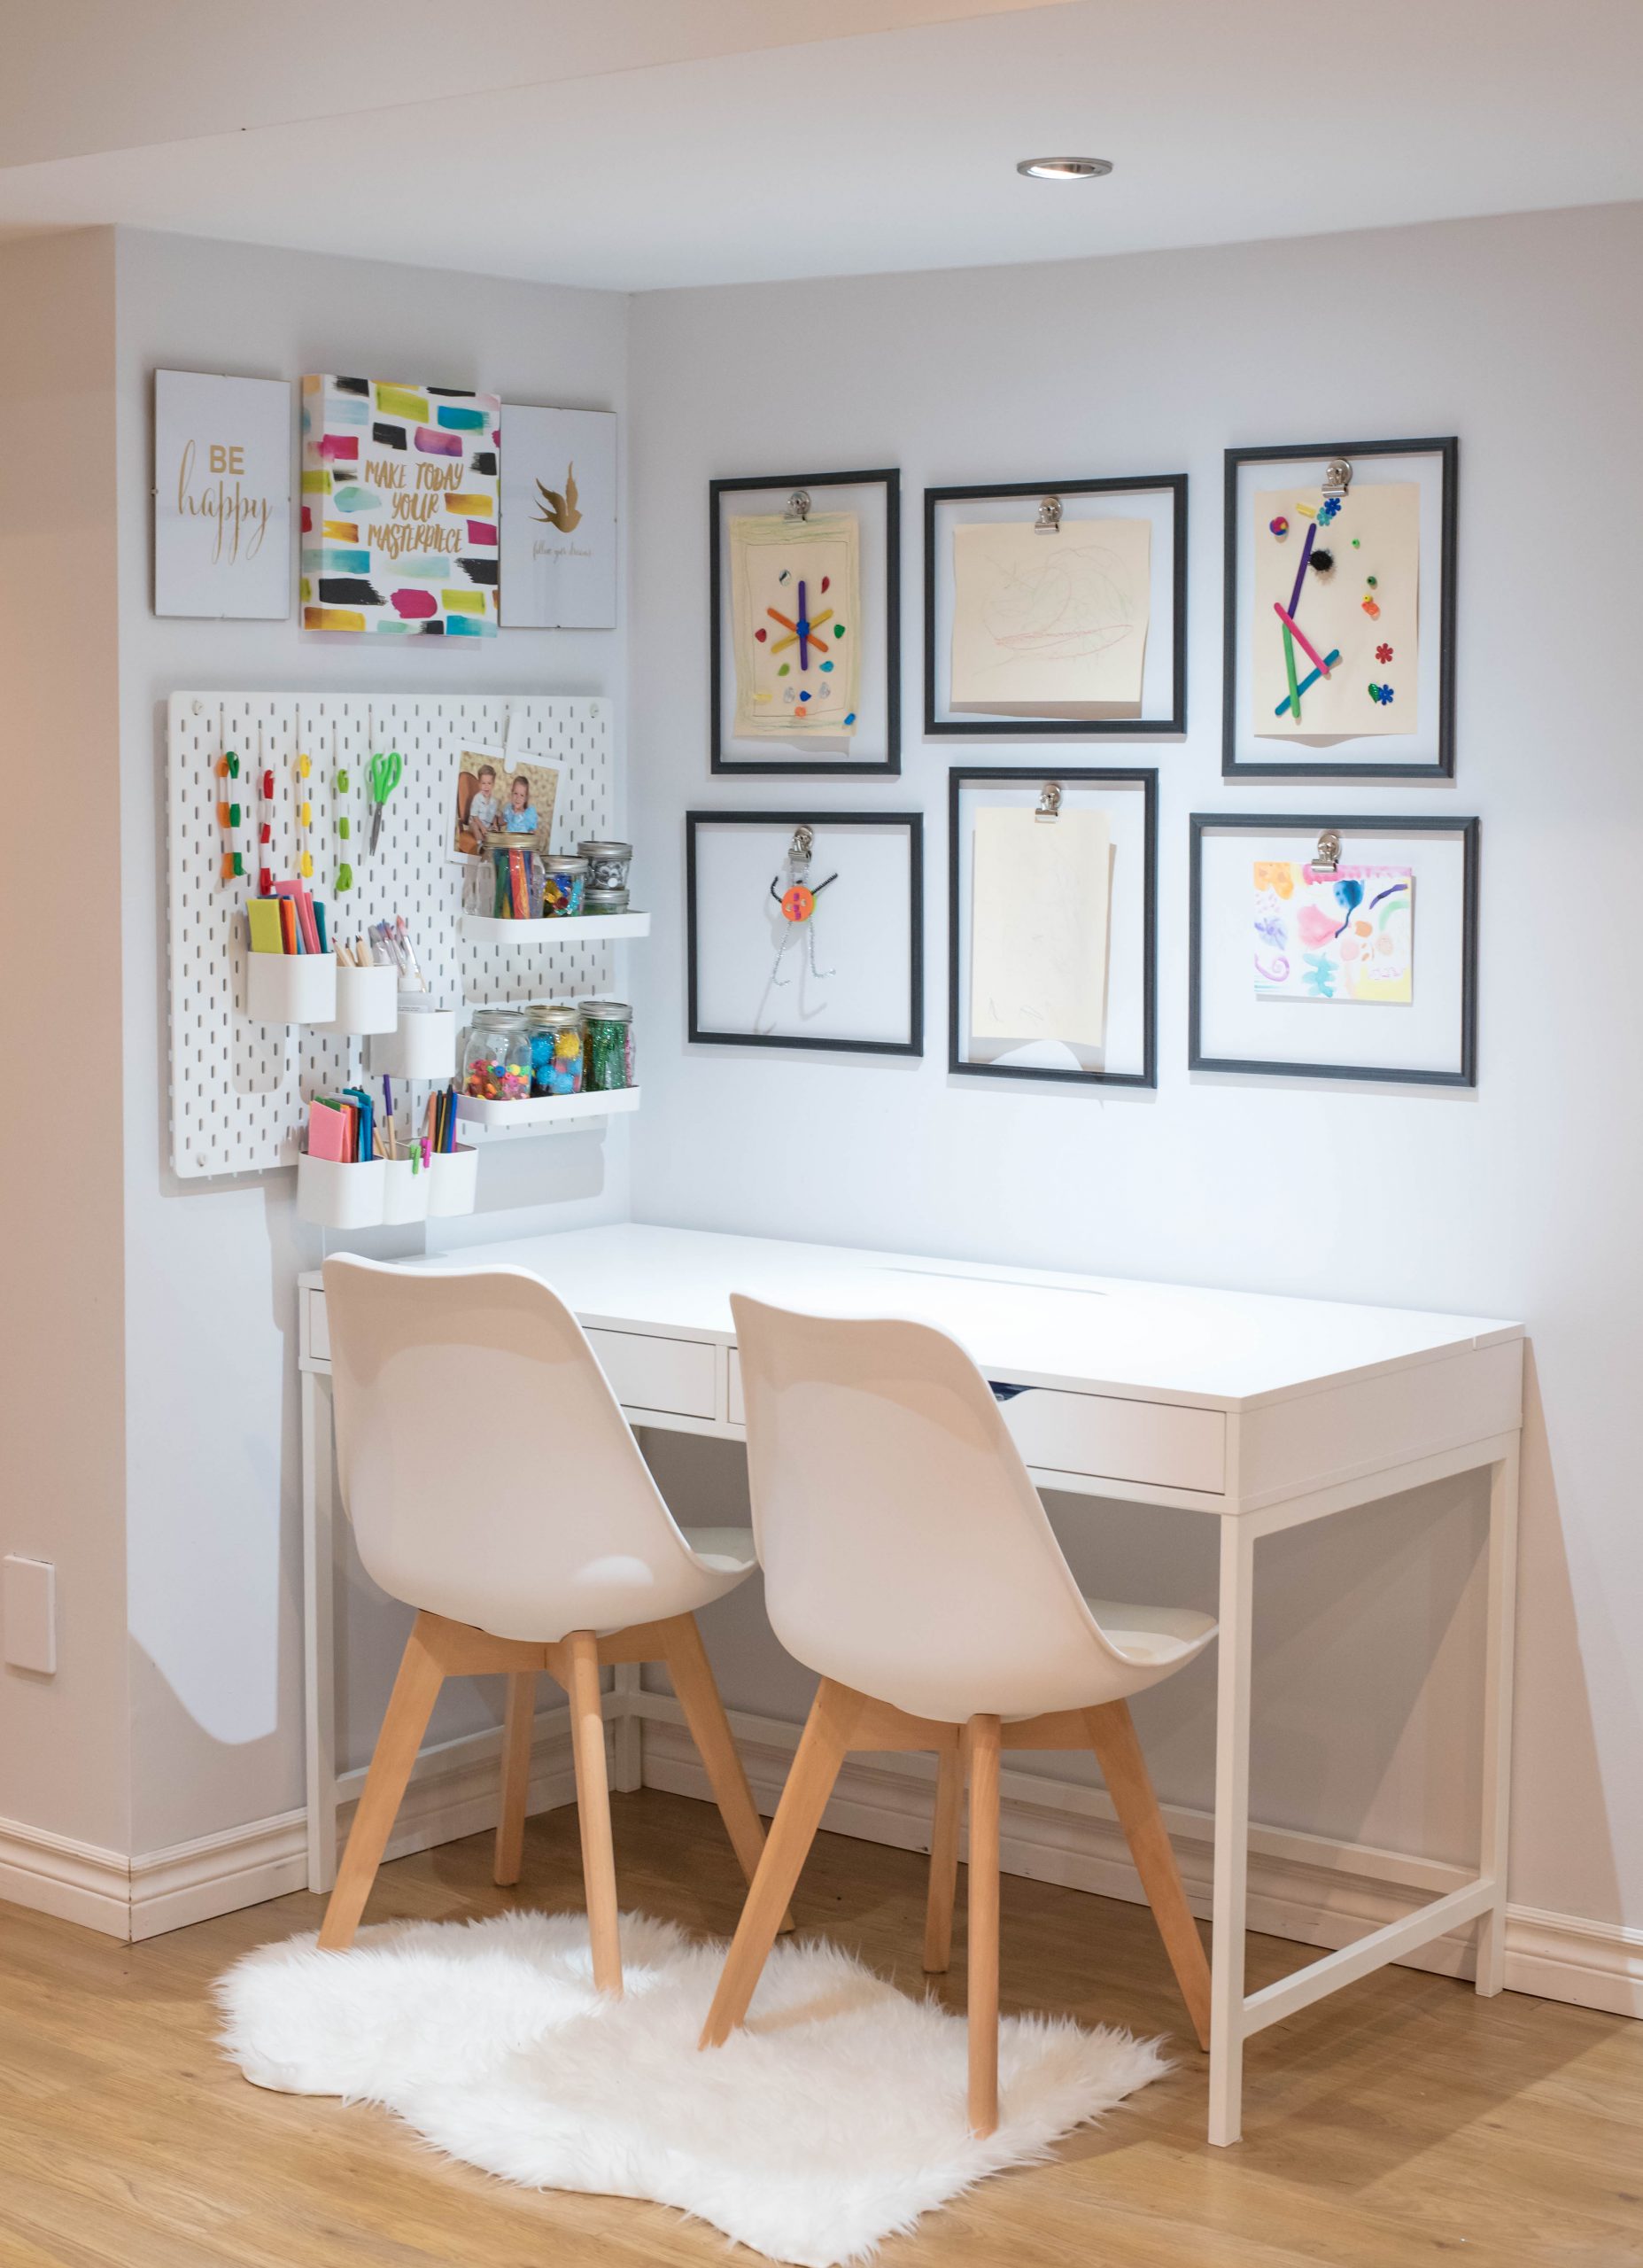 Kids' desk with artwork above it and two chairs